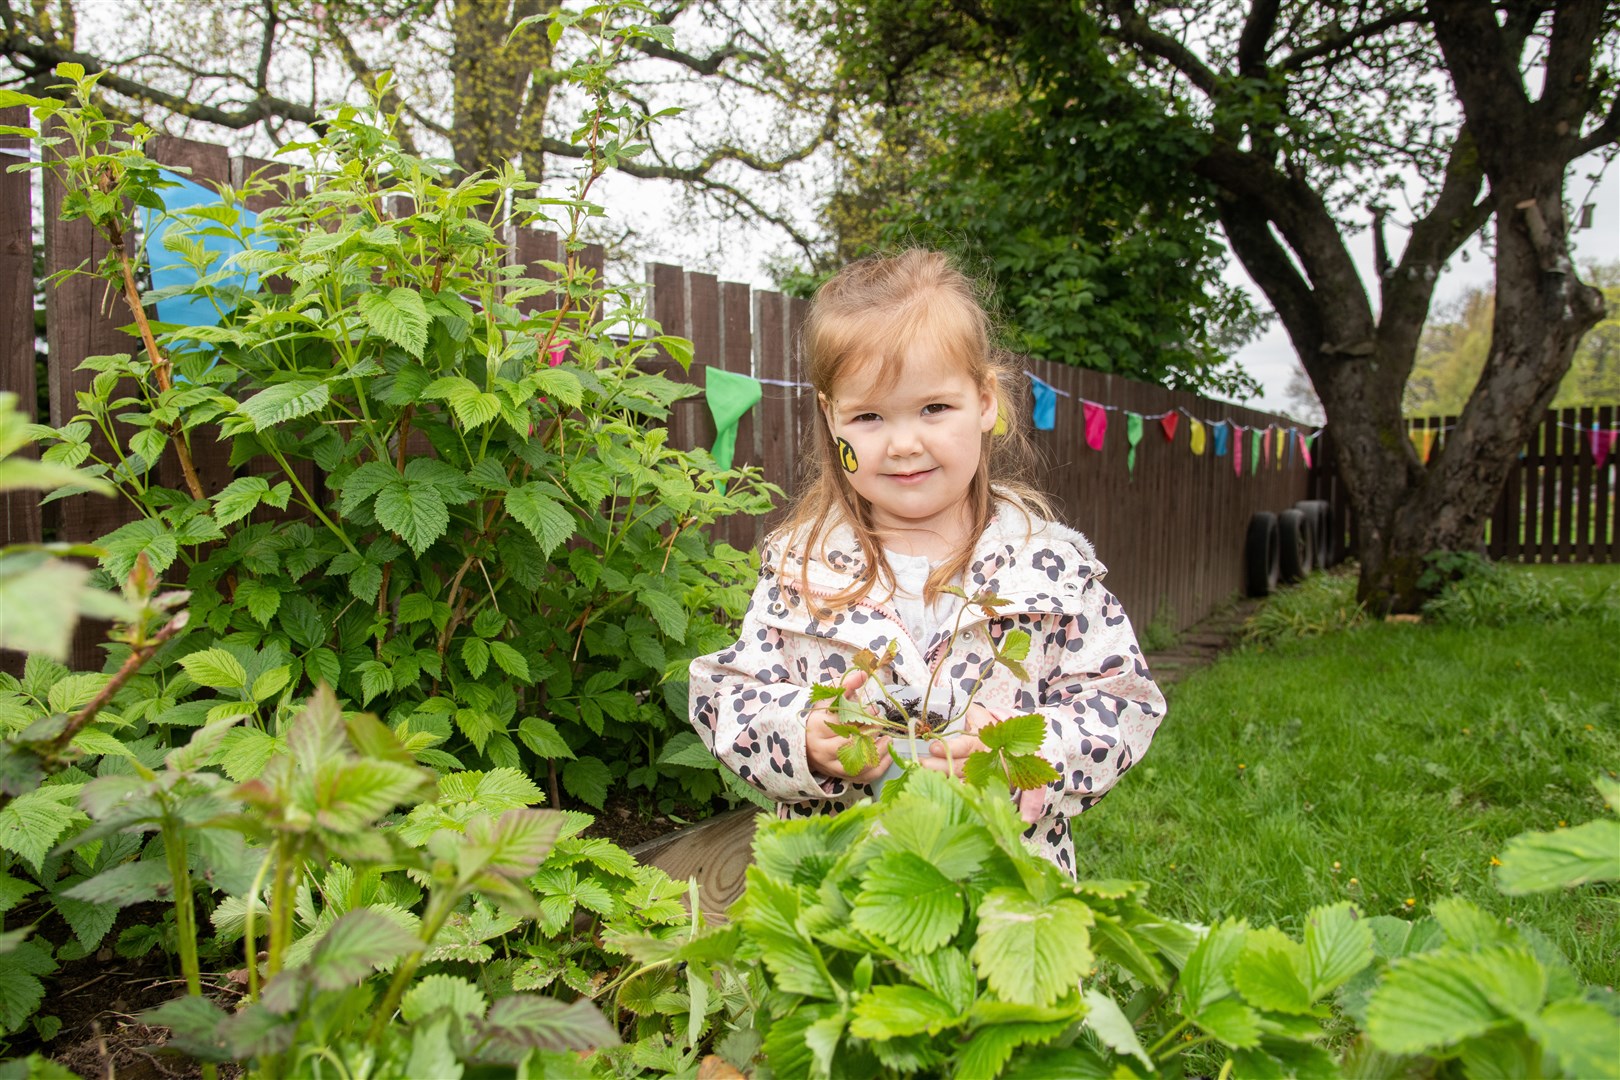 Thea Nelson helps to plant a strawberry plant in the garden area. Picture: Daniel Forsyth